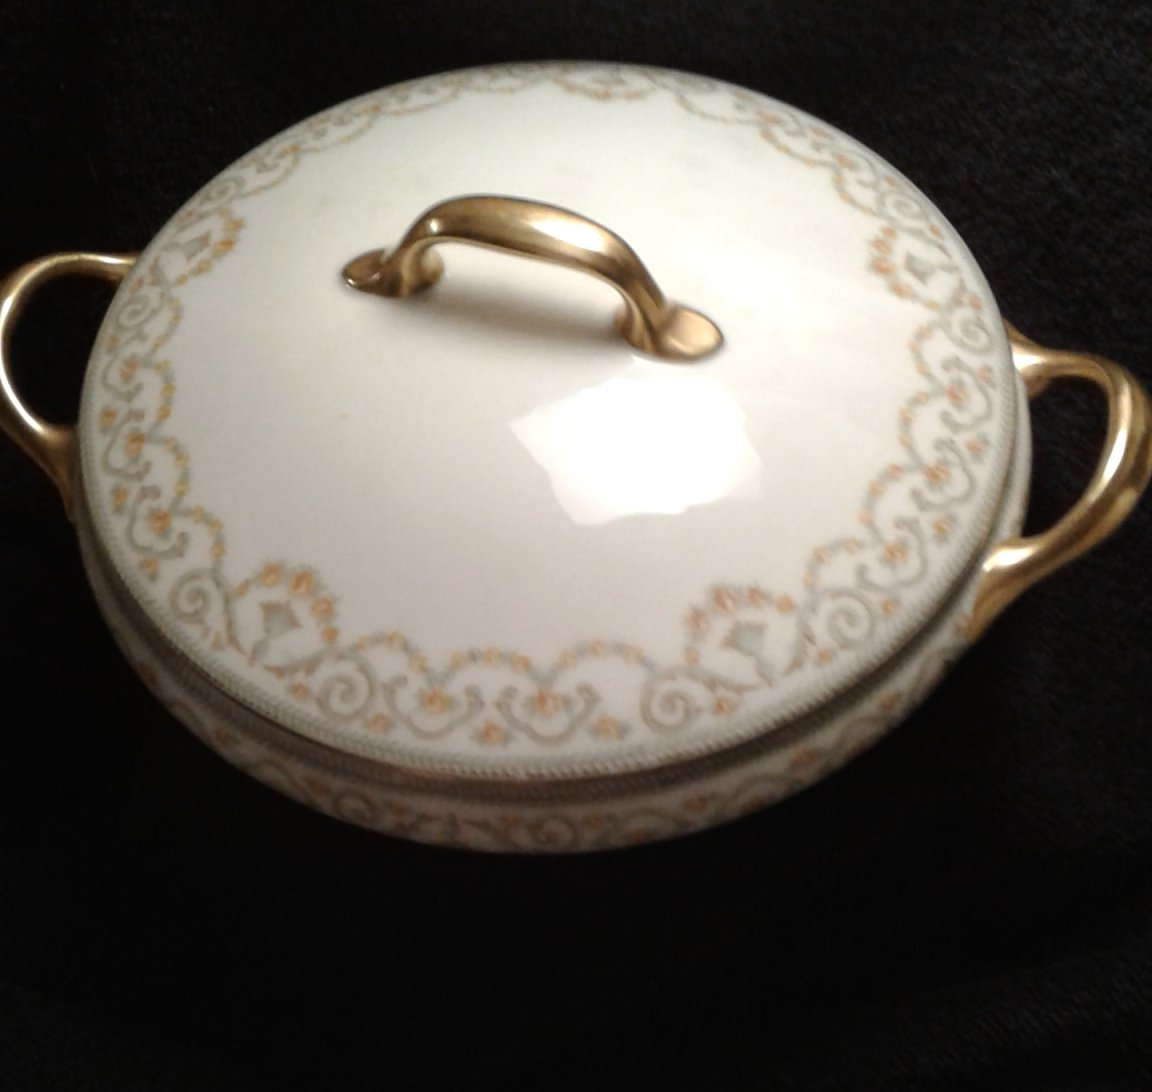 Limoges, Bawo & Dotter 1900 Round Covered Vegetable BWD13 Green Scroll Gold Trim